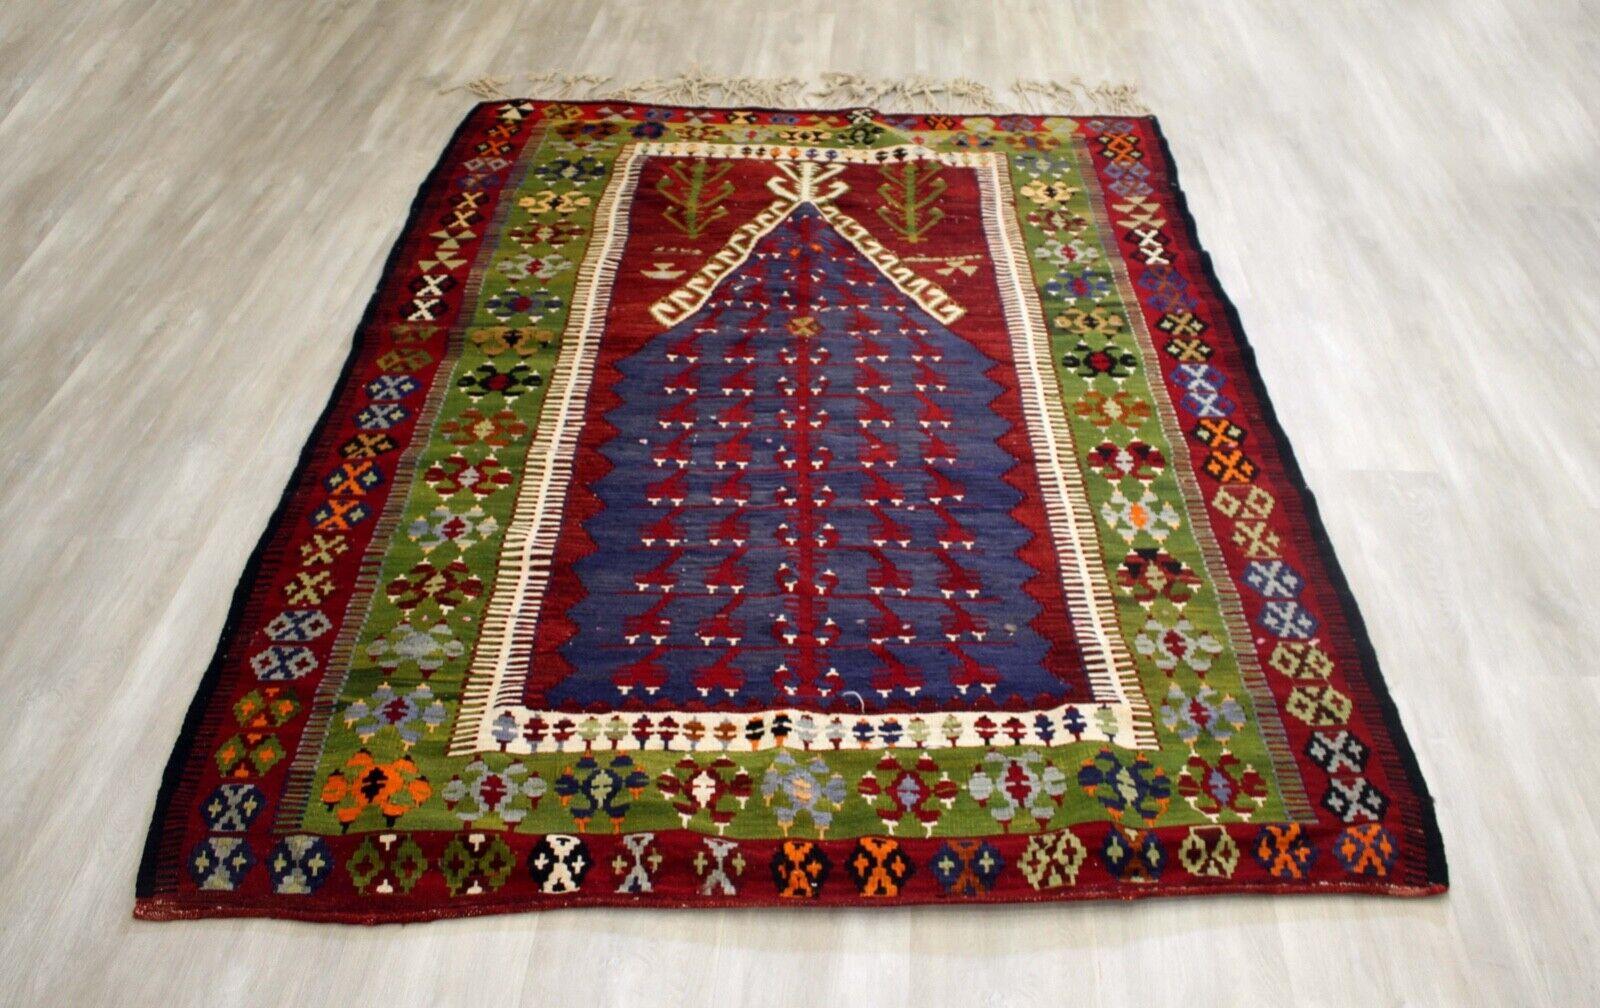 Hand Woven Wool Tribal Kilim Rug / Wall Hang In Good Condition For Sale In Keego Harbor, MI